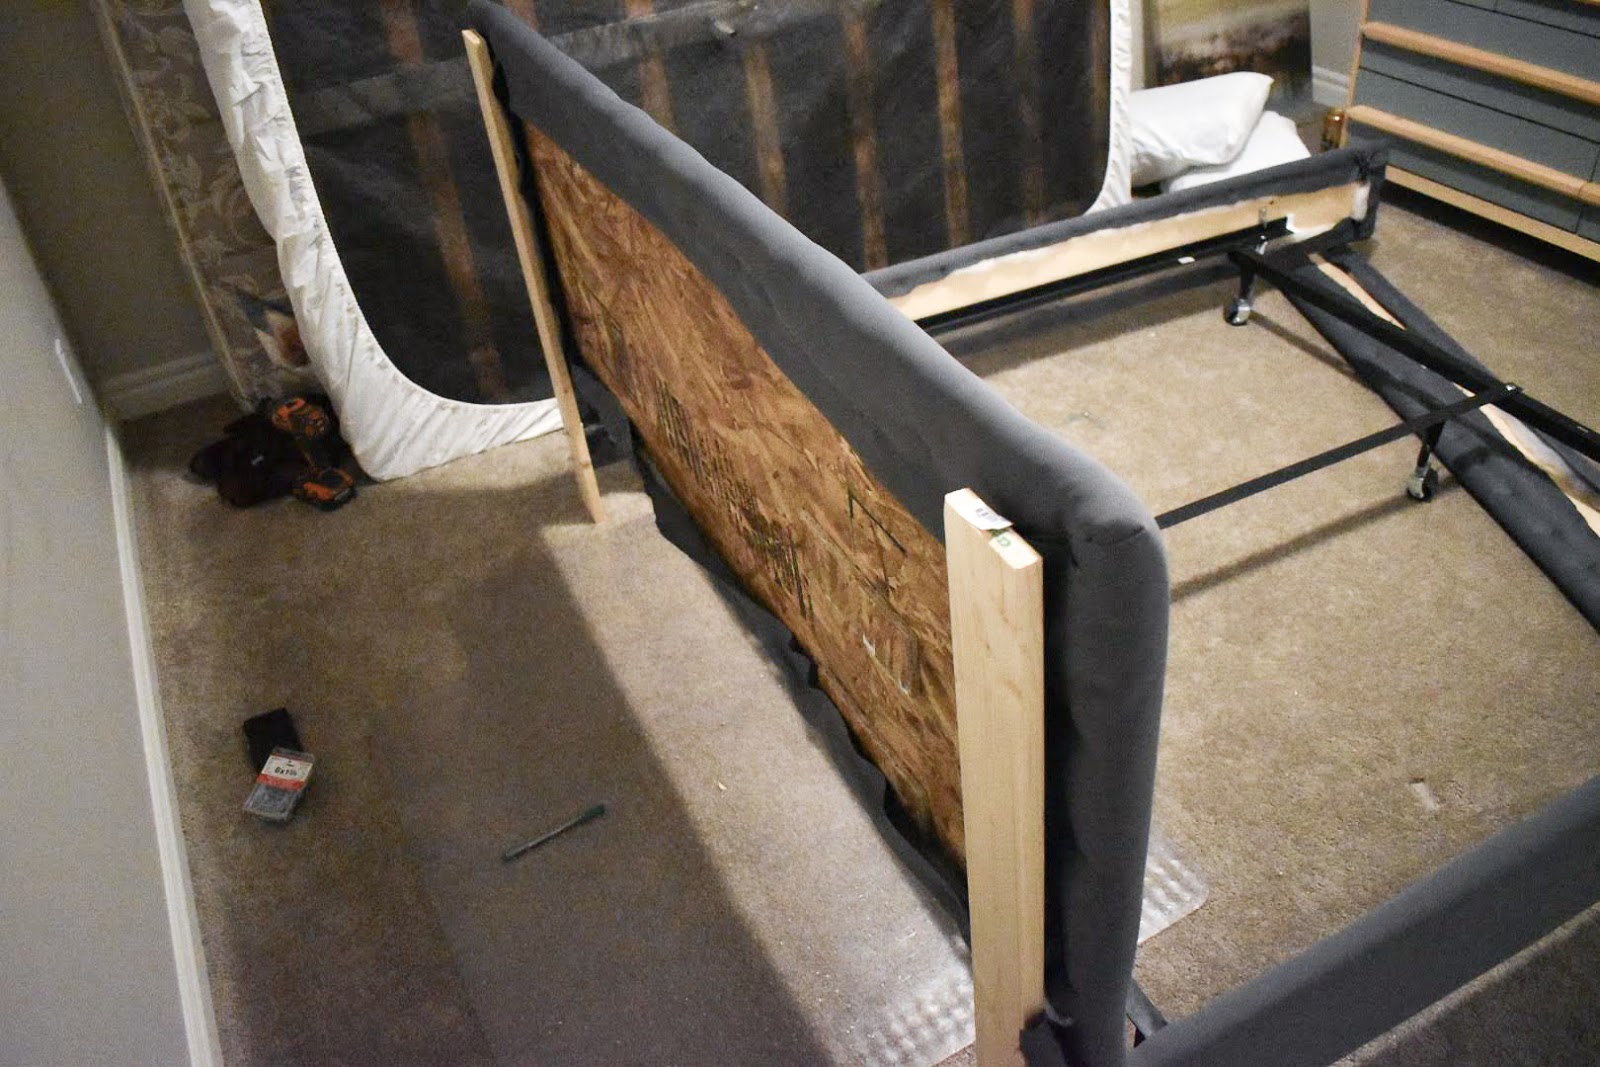 Metal Bed Frame Into An Upholstered, How To Connect Headboard Frame